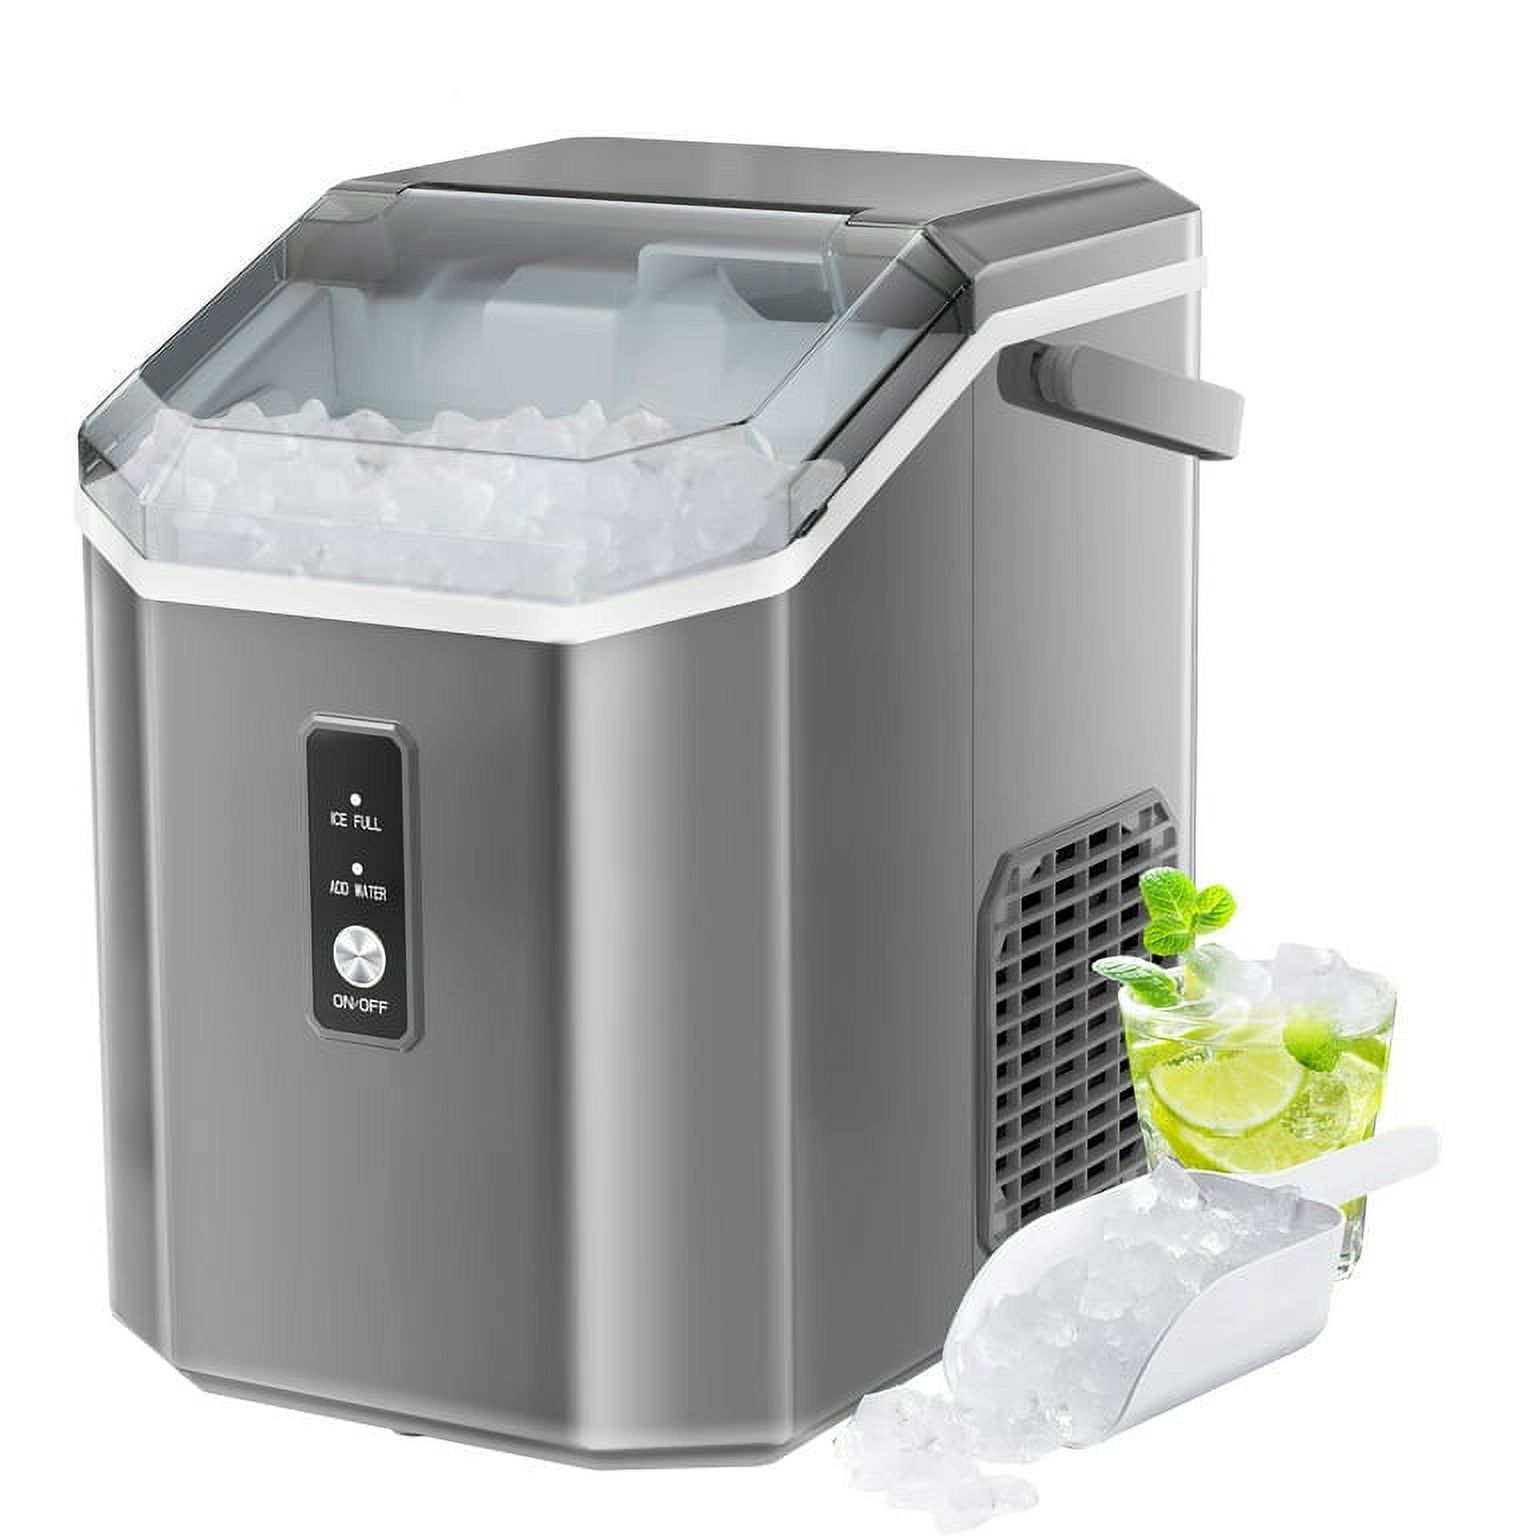 SYCEES Nugget Ice Maker Countertop, 55lbs/24h, 13lbs Storage, Sonic Ice  Ready in 7 Mins, 2 Ways to Add Water, Self-Cleaning Pellet Ice Machine for  Home, Office, Bar, Cafe, Restaurant, Commercial Use 